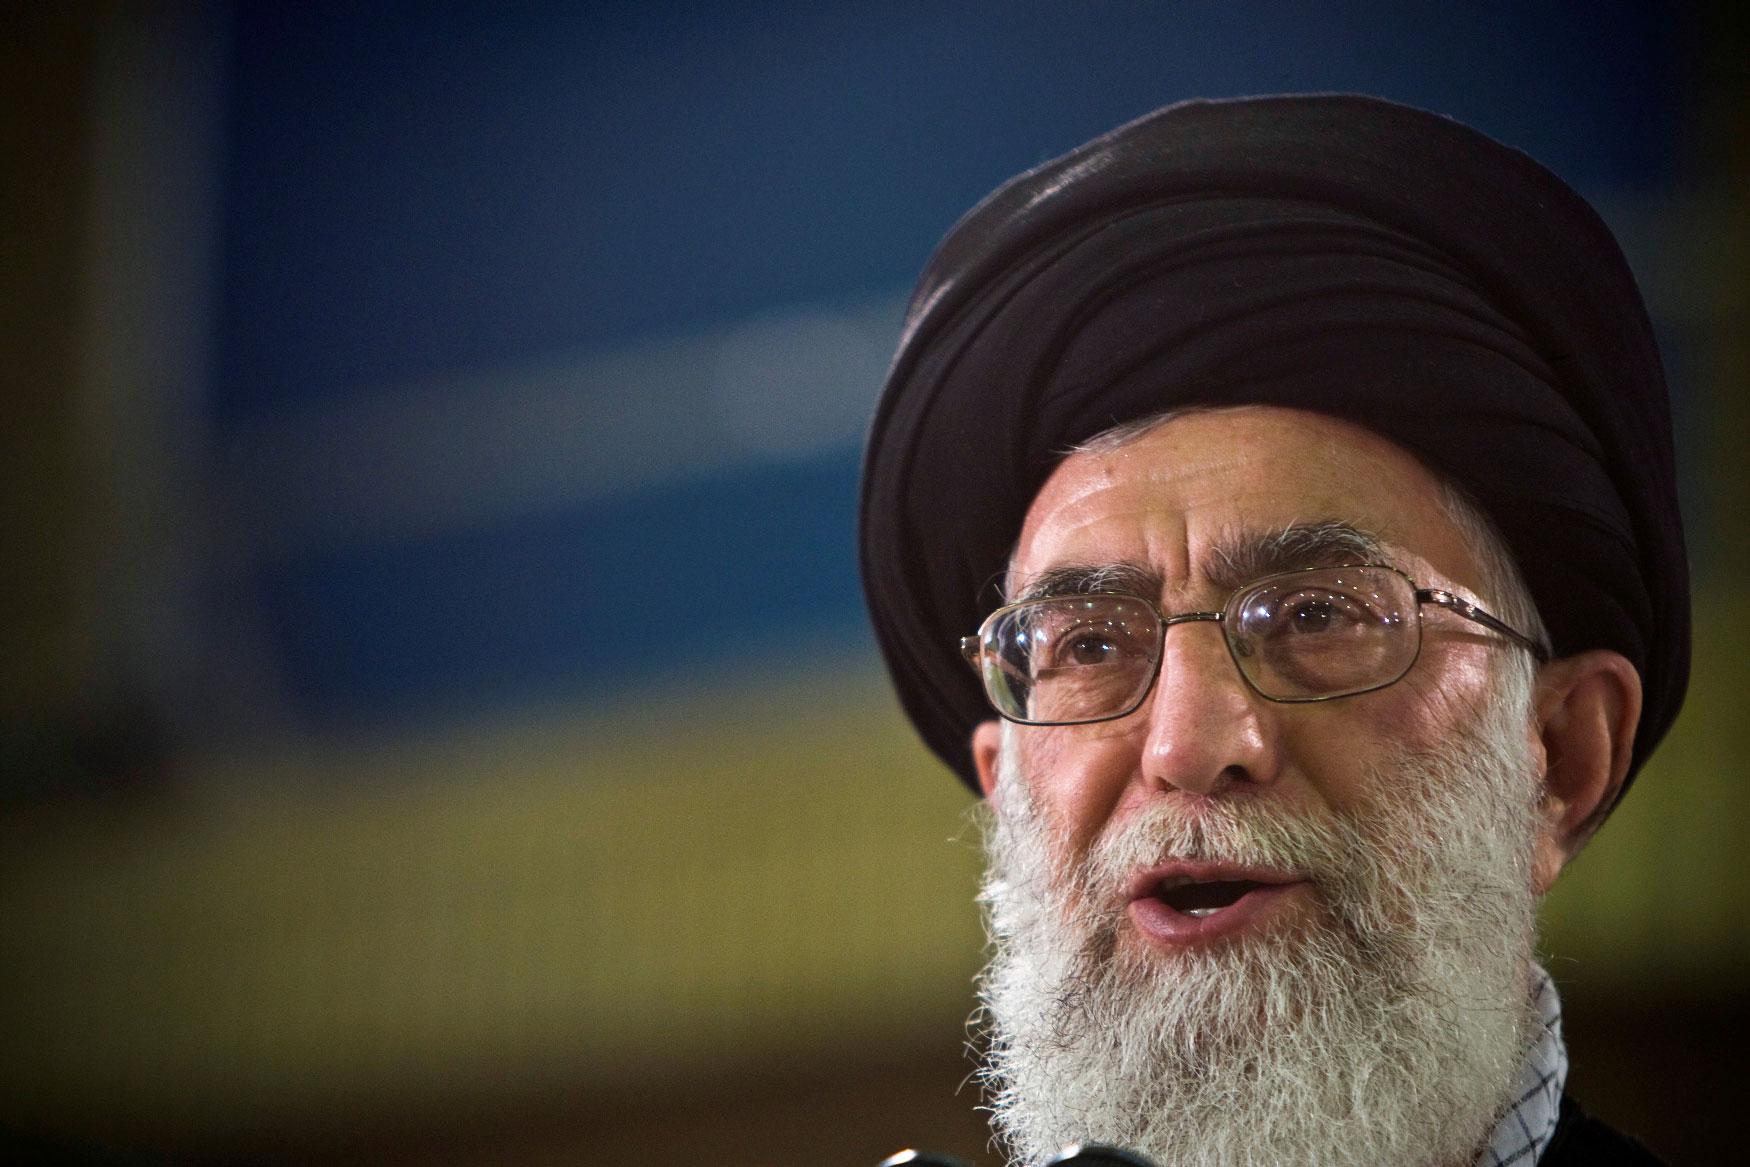 Khamenei has the ultimate say on all major foreign and domestic policy in Iran.